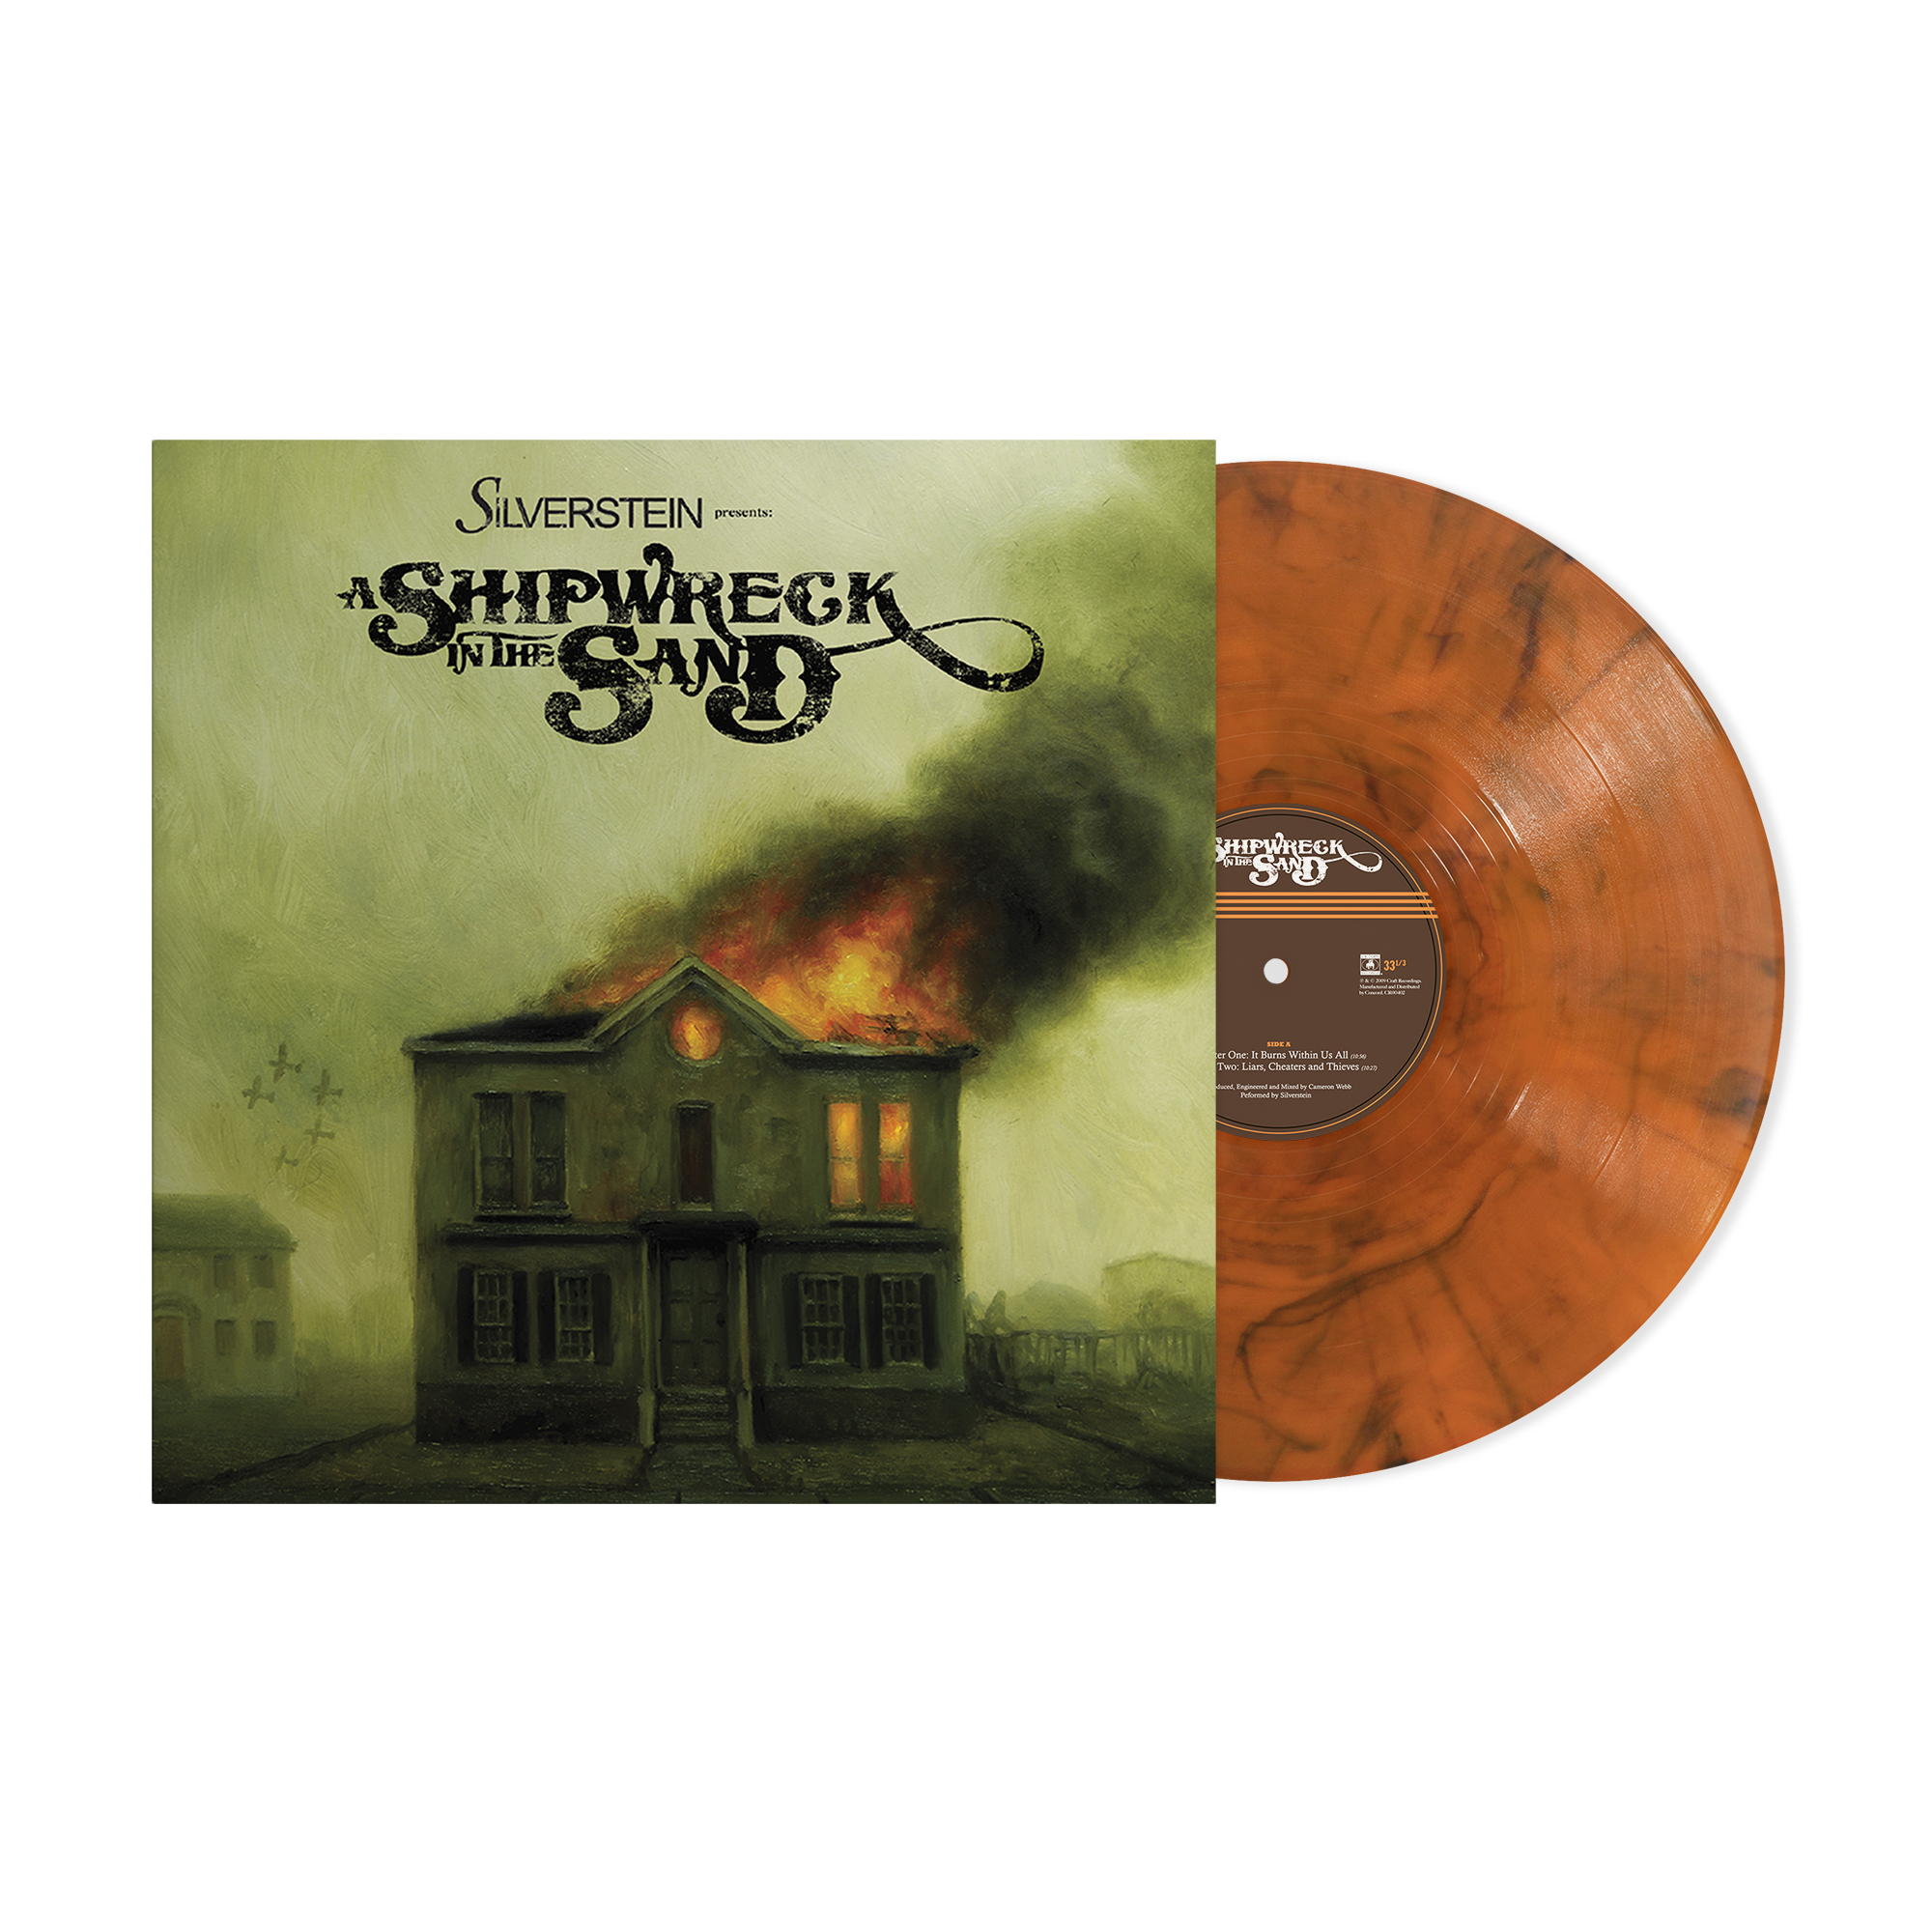 A Shipwreck in the Sand (Limited Edition Orange Smoke LP)